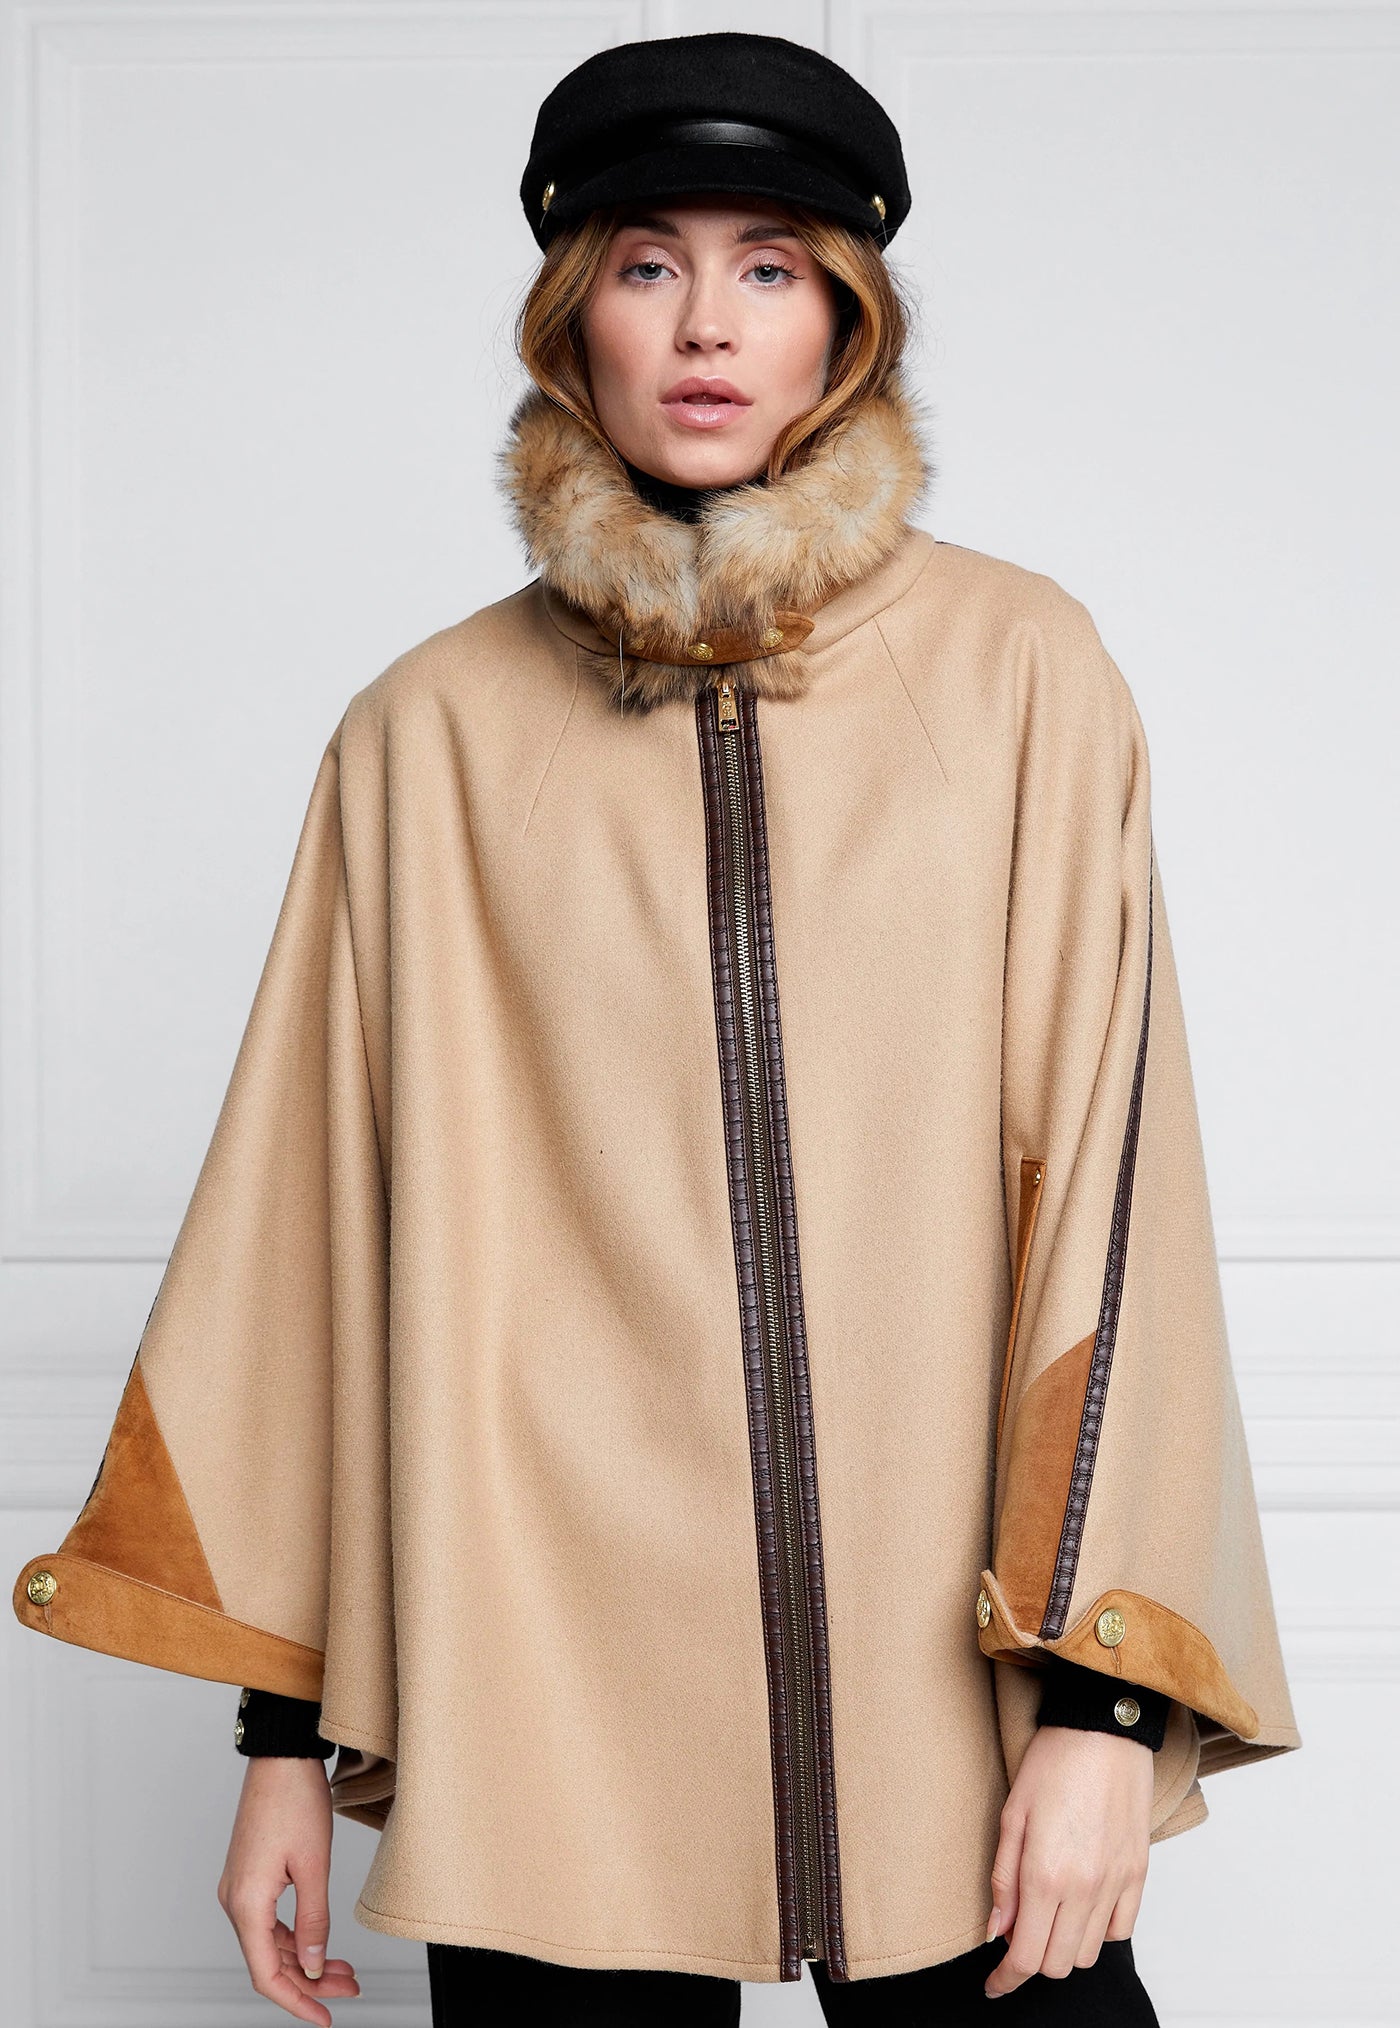 Chiltern Cape - Camel sold by Angel Divine